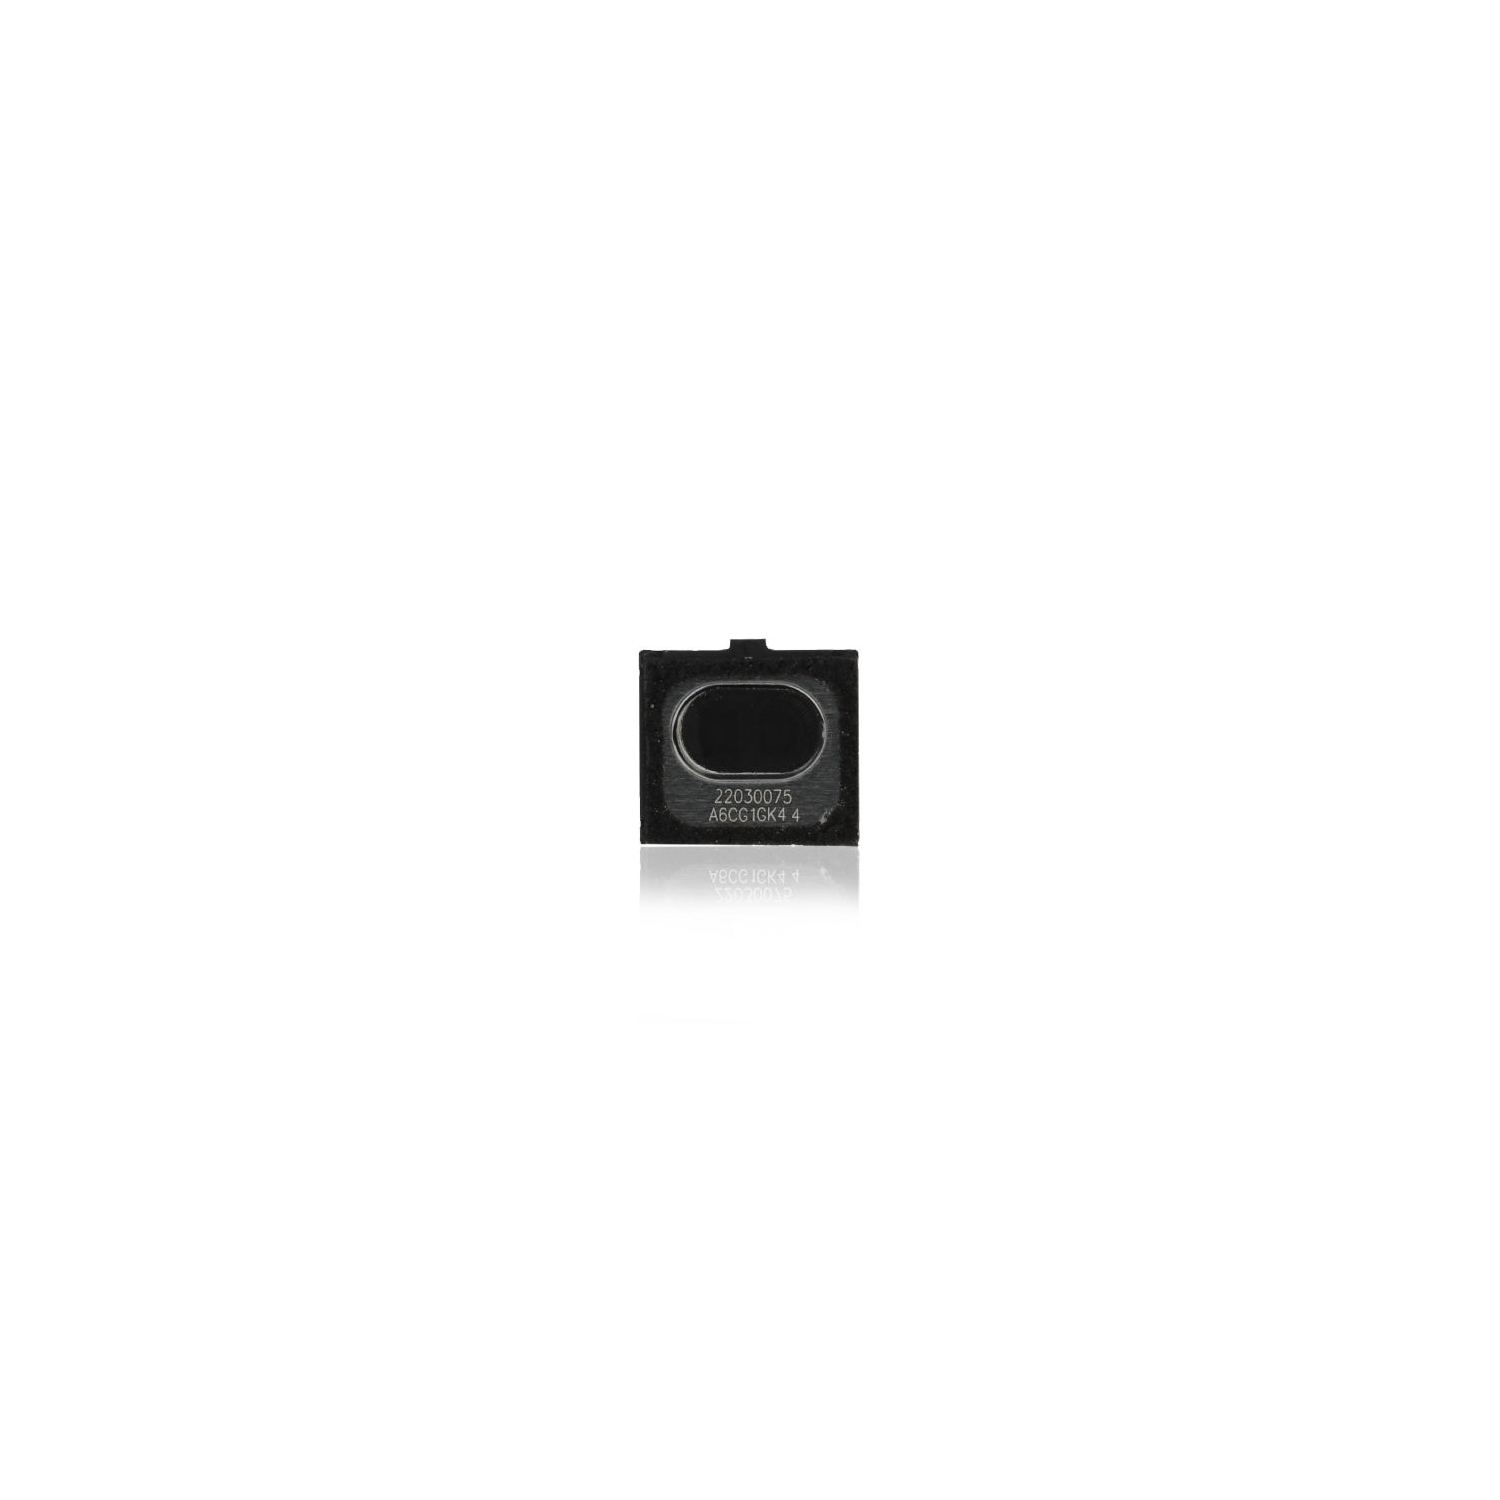 Replacement Earpiece Speaker Compatible For Huawei P9 Lite